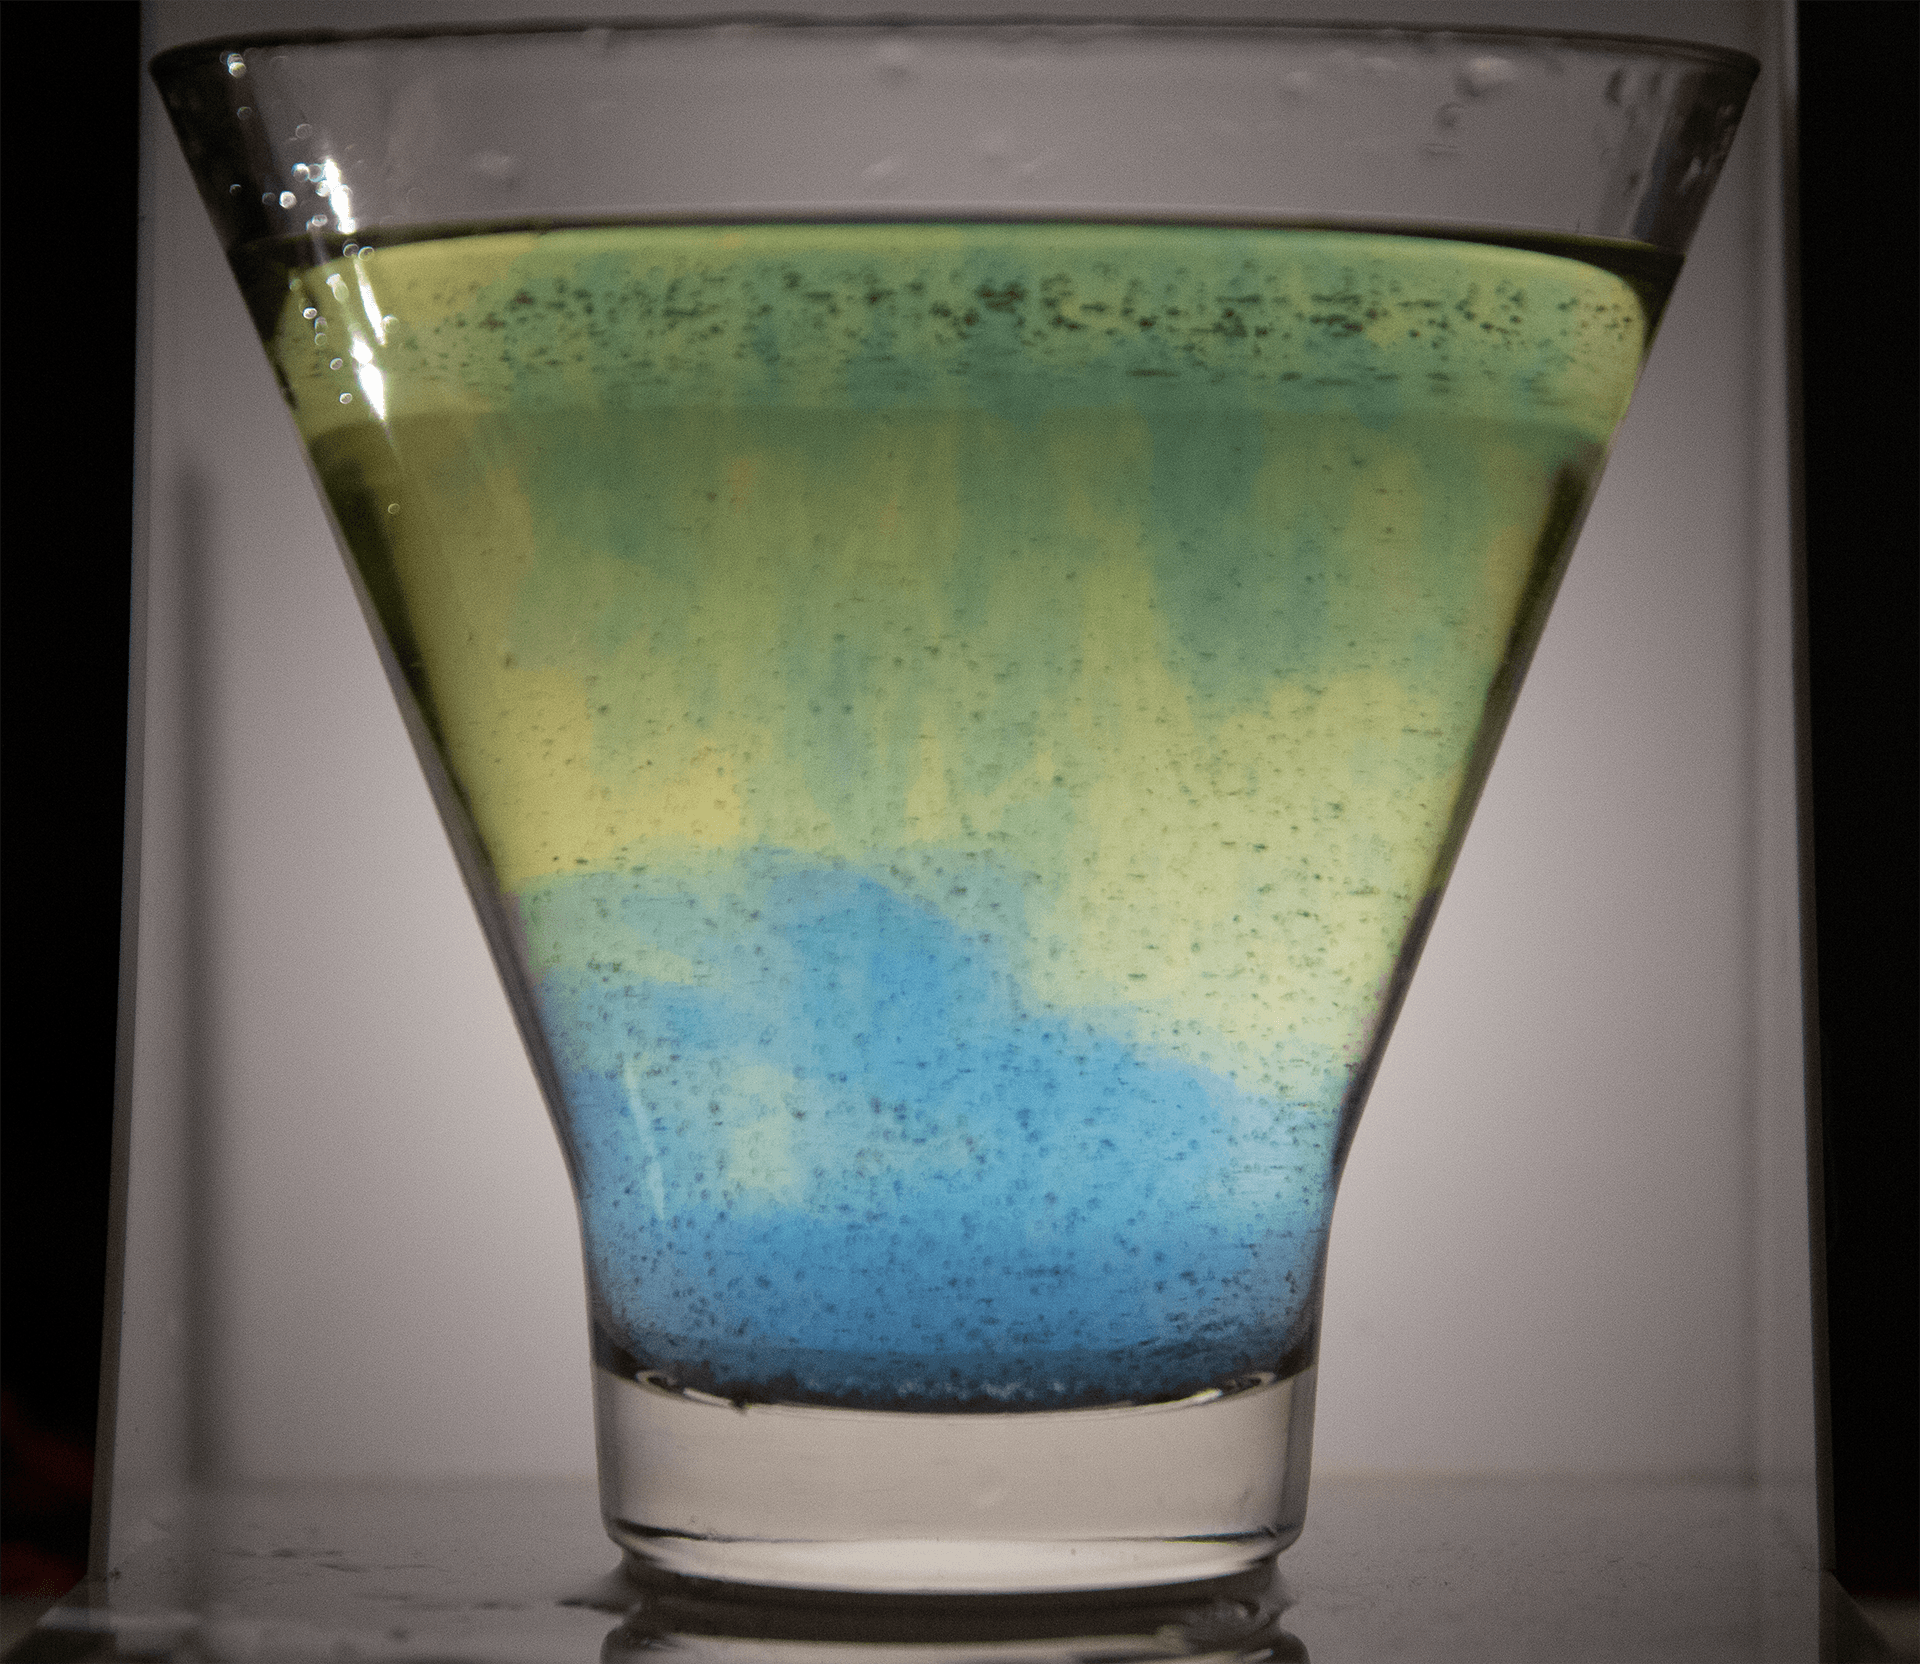 Using a pH indicator to change a glass of liquid from yellow to blue.  Here, bubbles were blown into the liquid to make it acidic, turning it yellow, and Oxyclean is added gradually making it basic and turning it blue.  The hue and saturation of this liquid can be measured and used to modulate sounds.